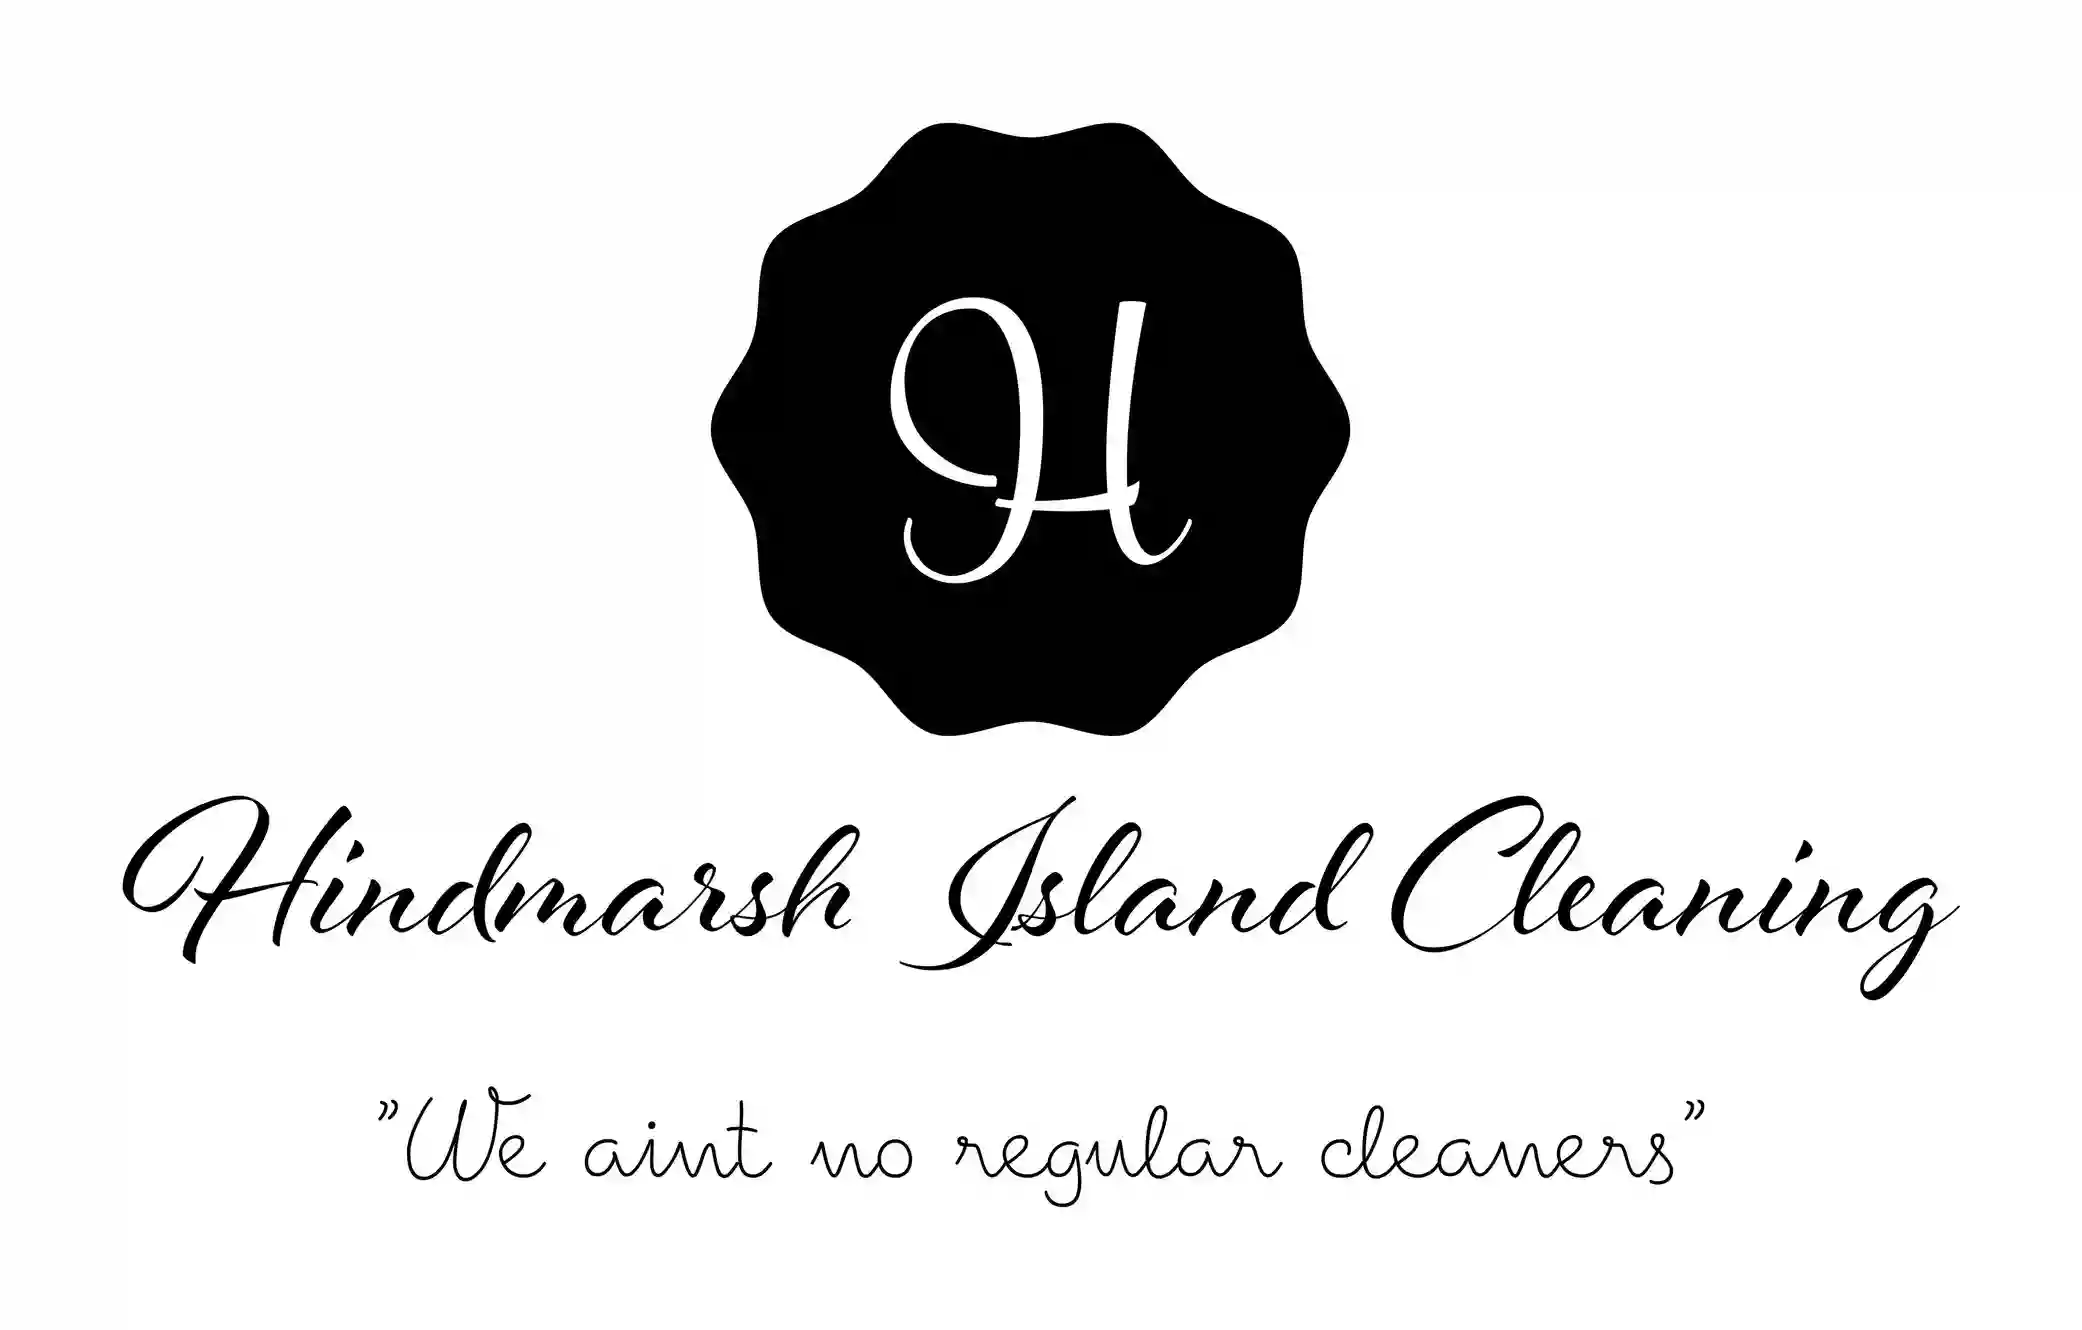 Hindmarsh Island Cleaning Services